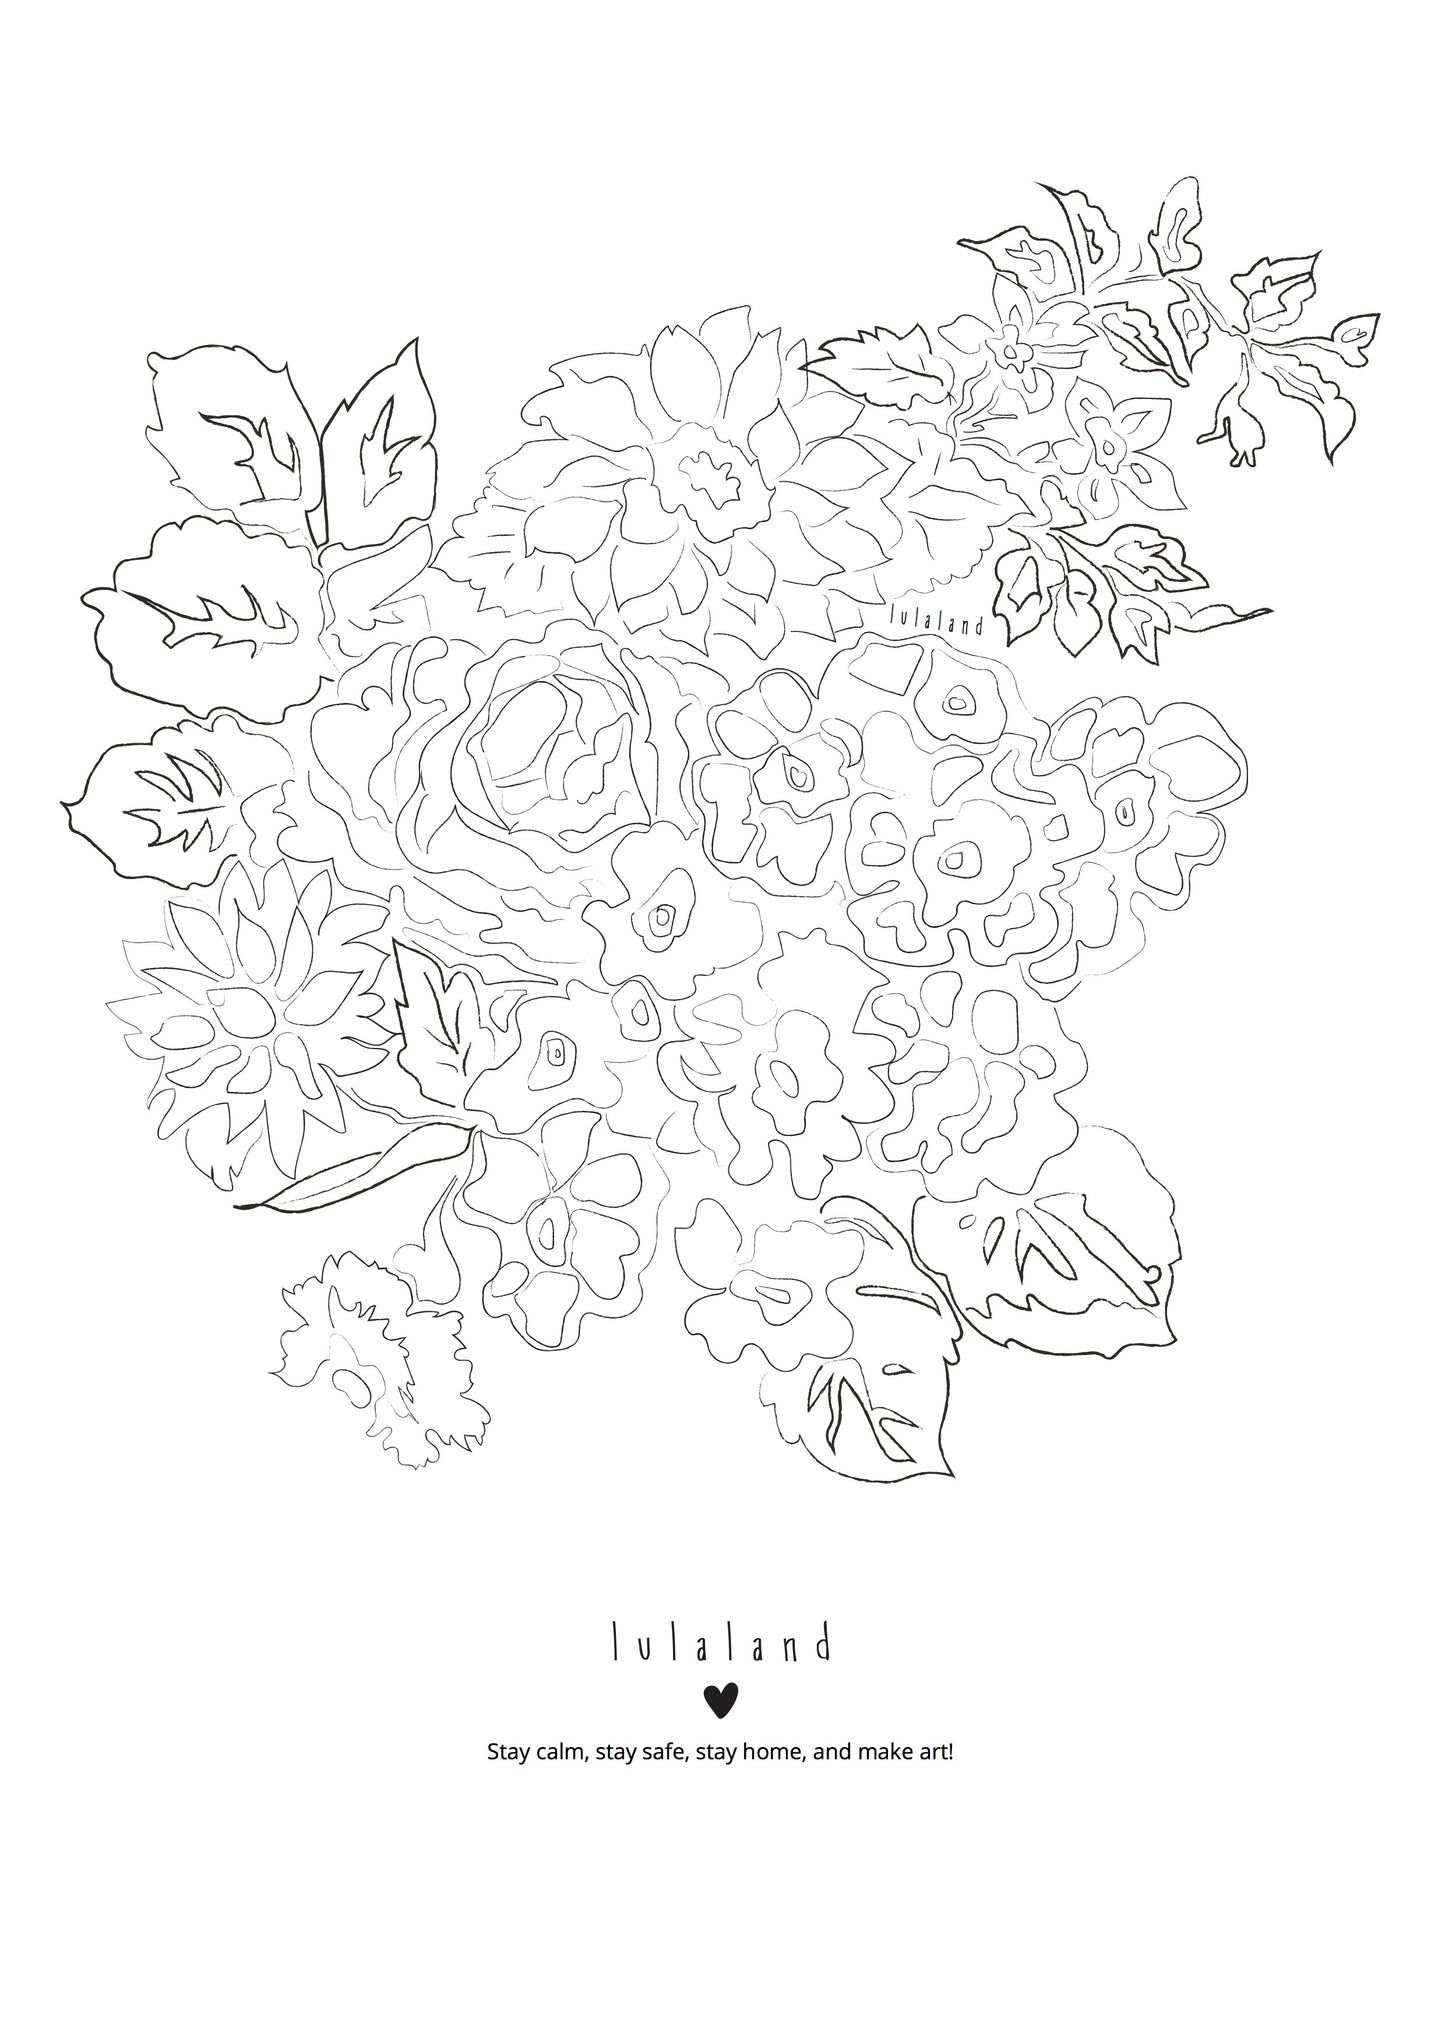 FREE Printable coloring lulaland Flowers Nr 1- Download it!